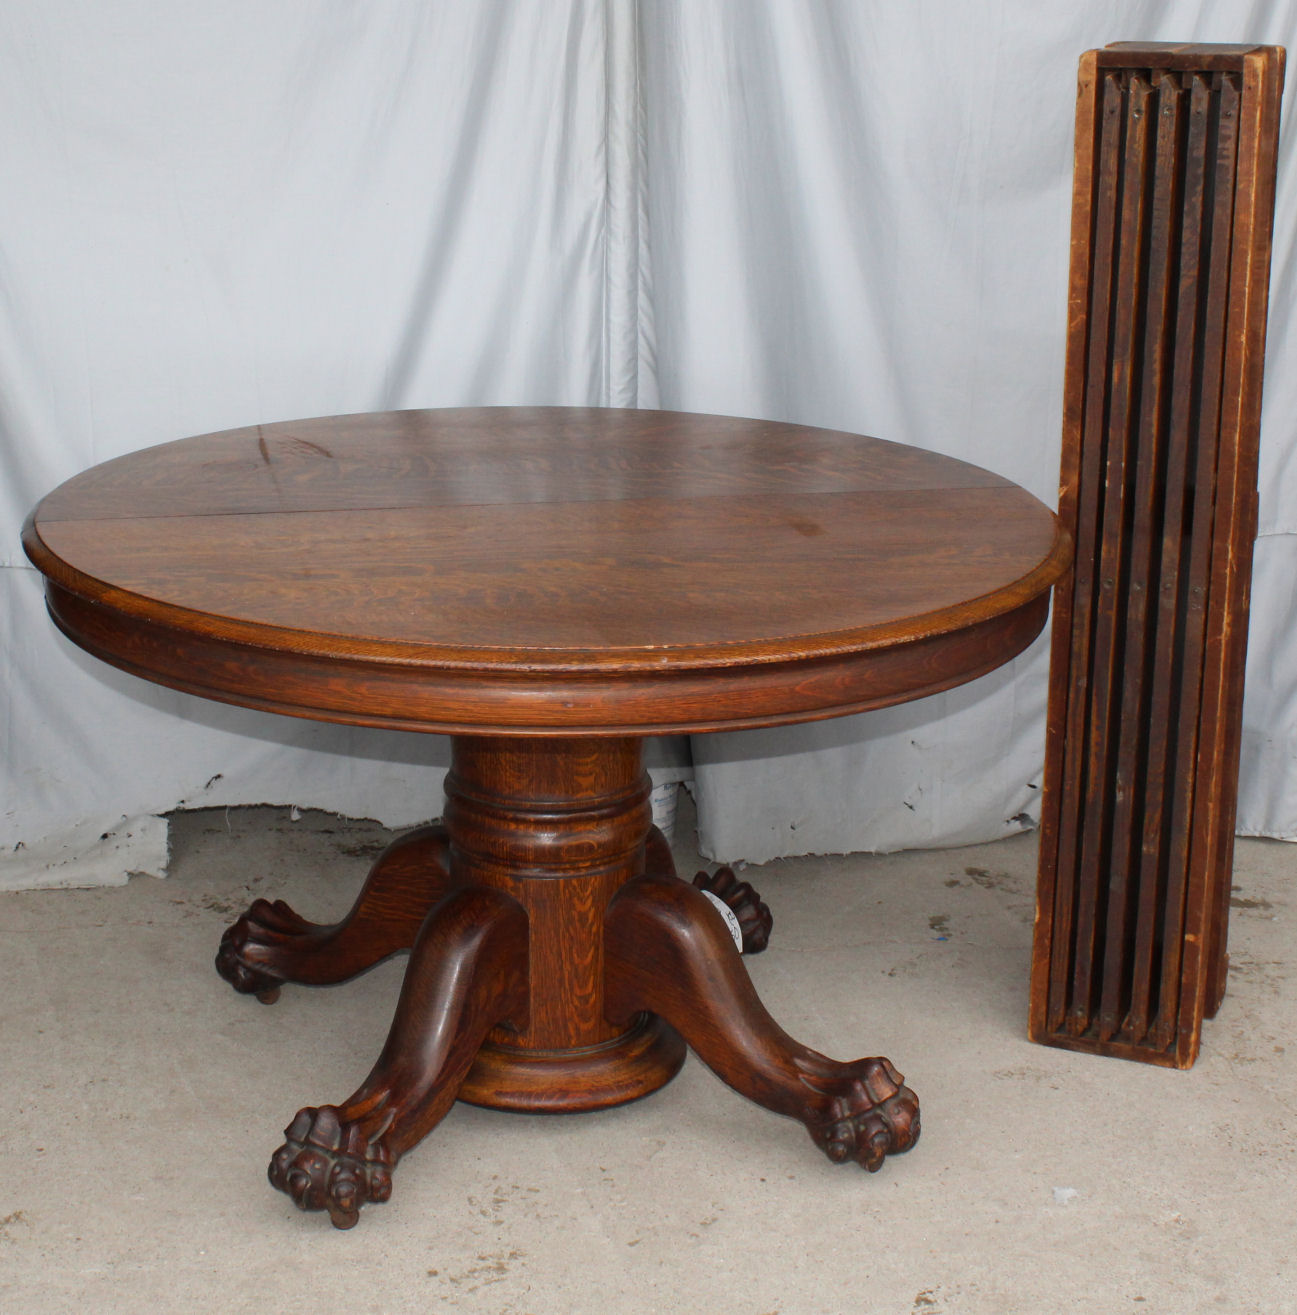 Antique Round Oak Dining Table, 48 Round Oak Dining Table With Leaf